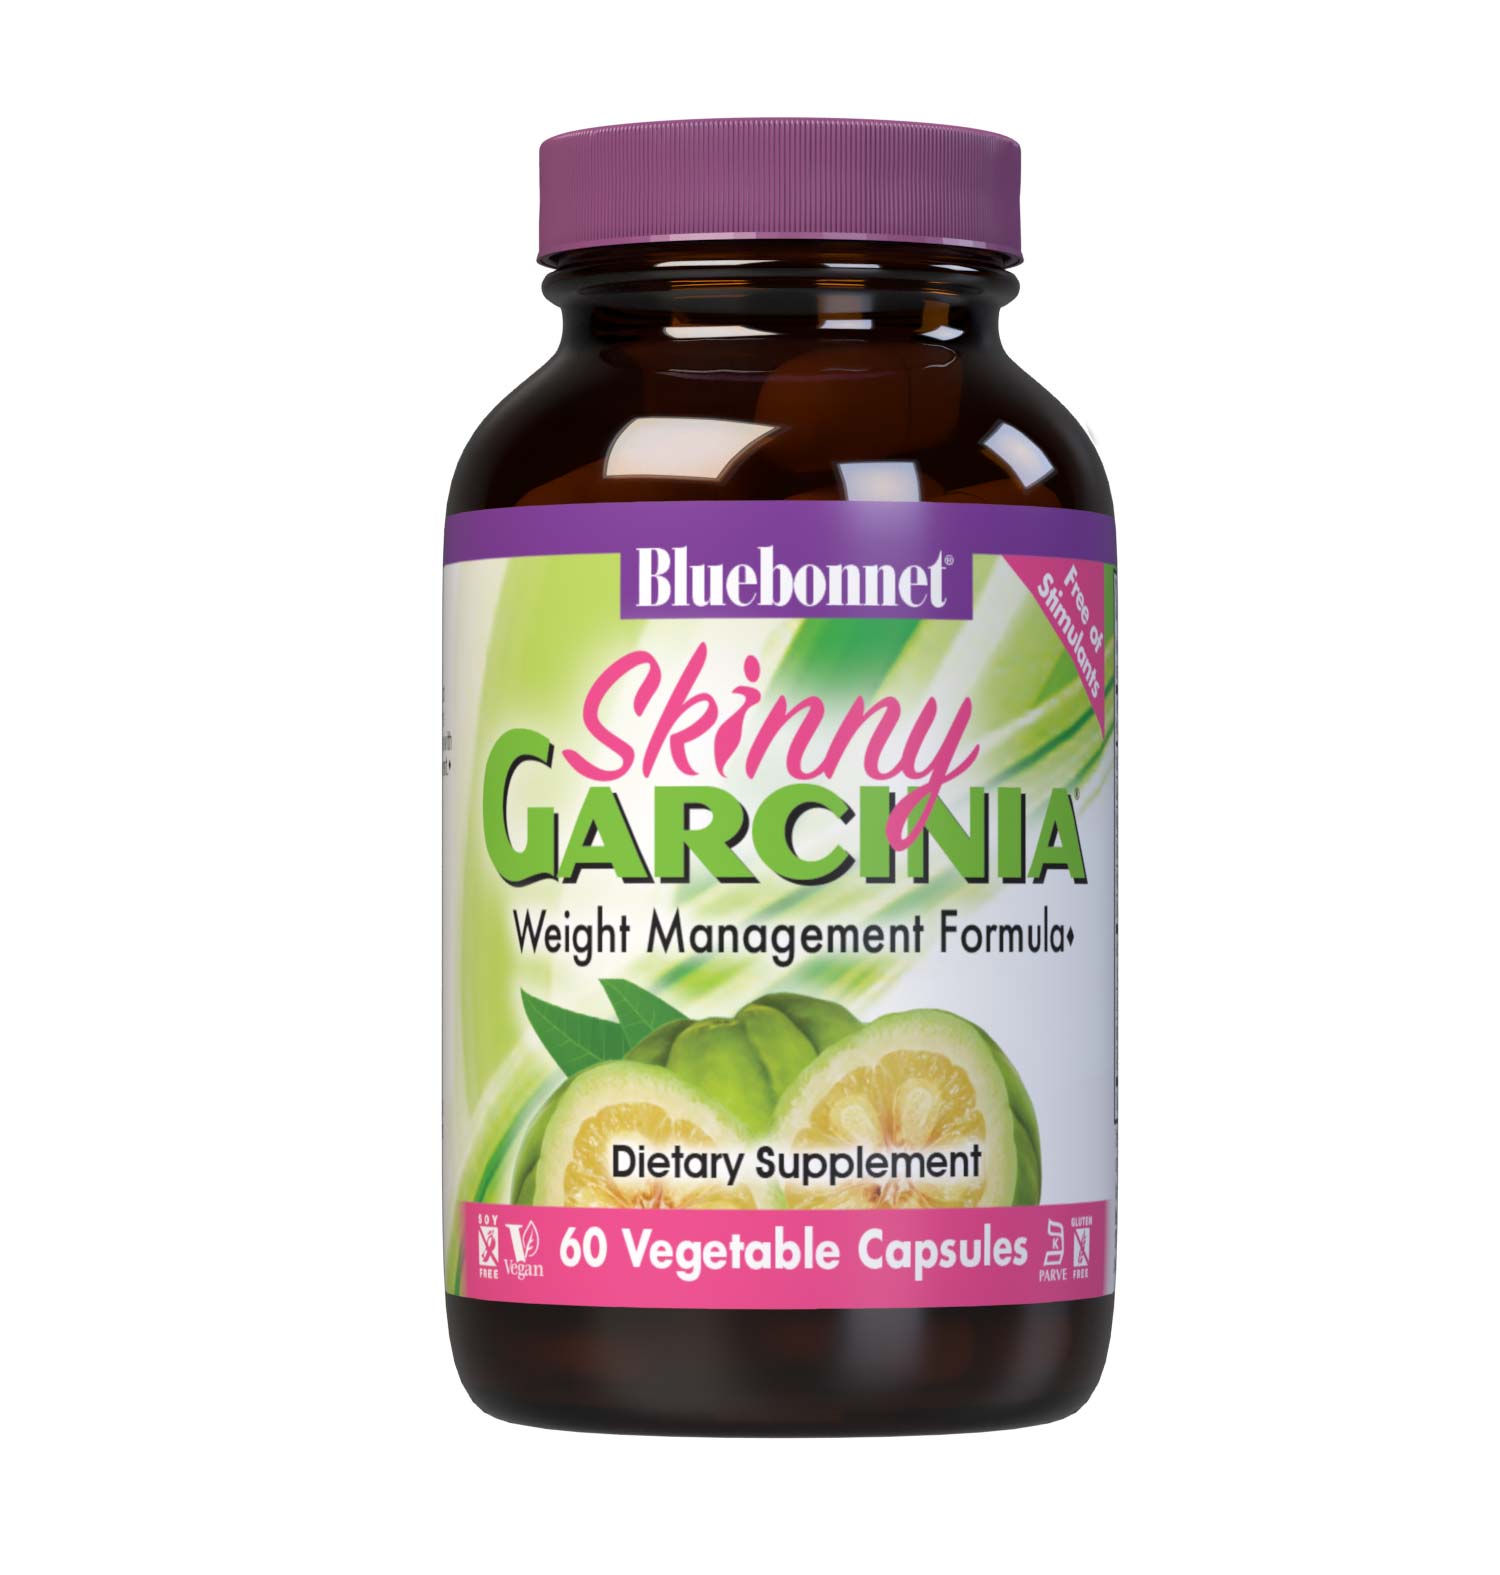 Bluebonnet’s Skinny Garcinia 60 Vegetable Capsules are specially formulated with the patented South Asian fruit extract, Garcinia cambogia, known as Super CitriMax that is standardized to 60% [750 mg] hydroxycitric acid (HCA). When combined with proper diet and exercise, this caffeine-free, non-stimulant formula may help support healthy weight management by burning fat, supporting healthy blood sugar levels already within normal range, and curbing appetite. #size_60 count